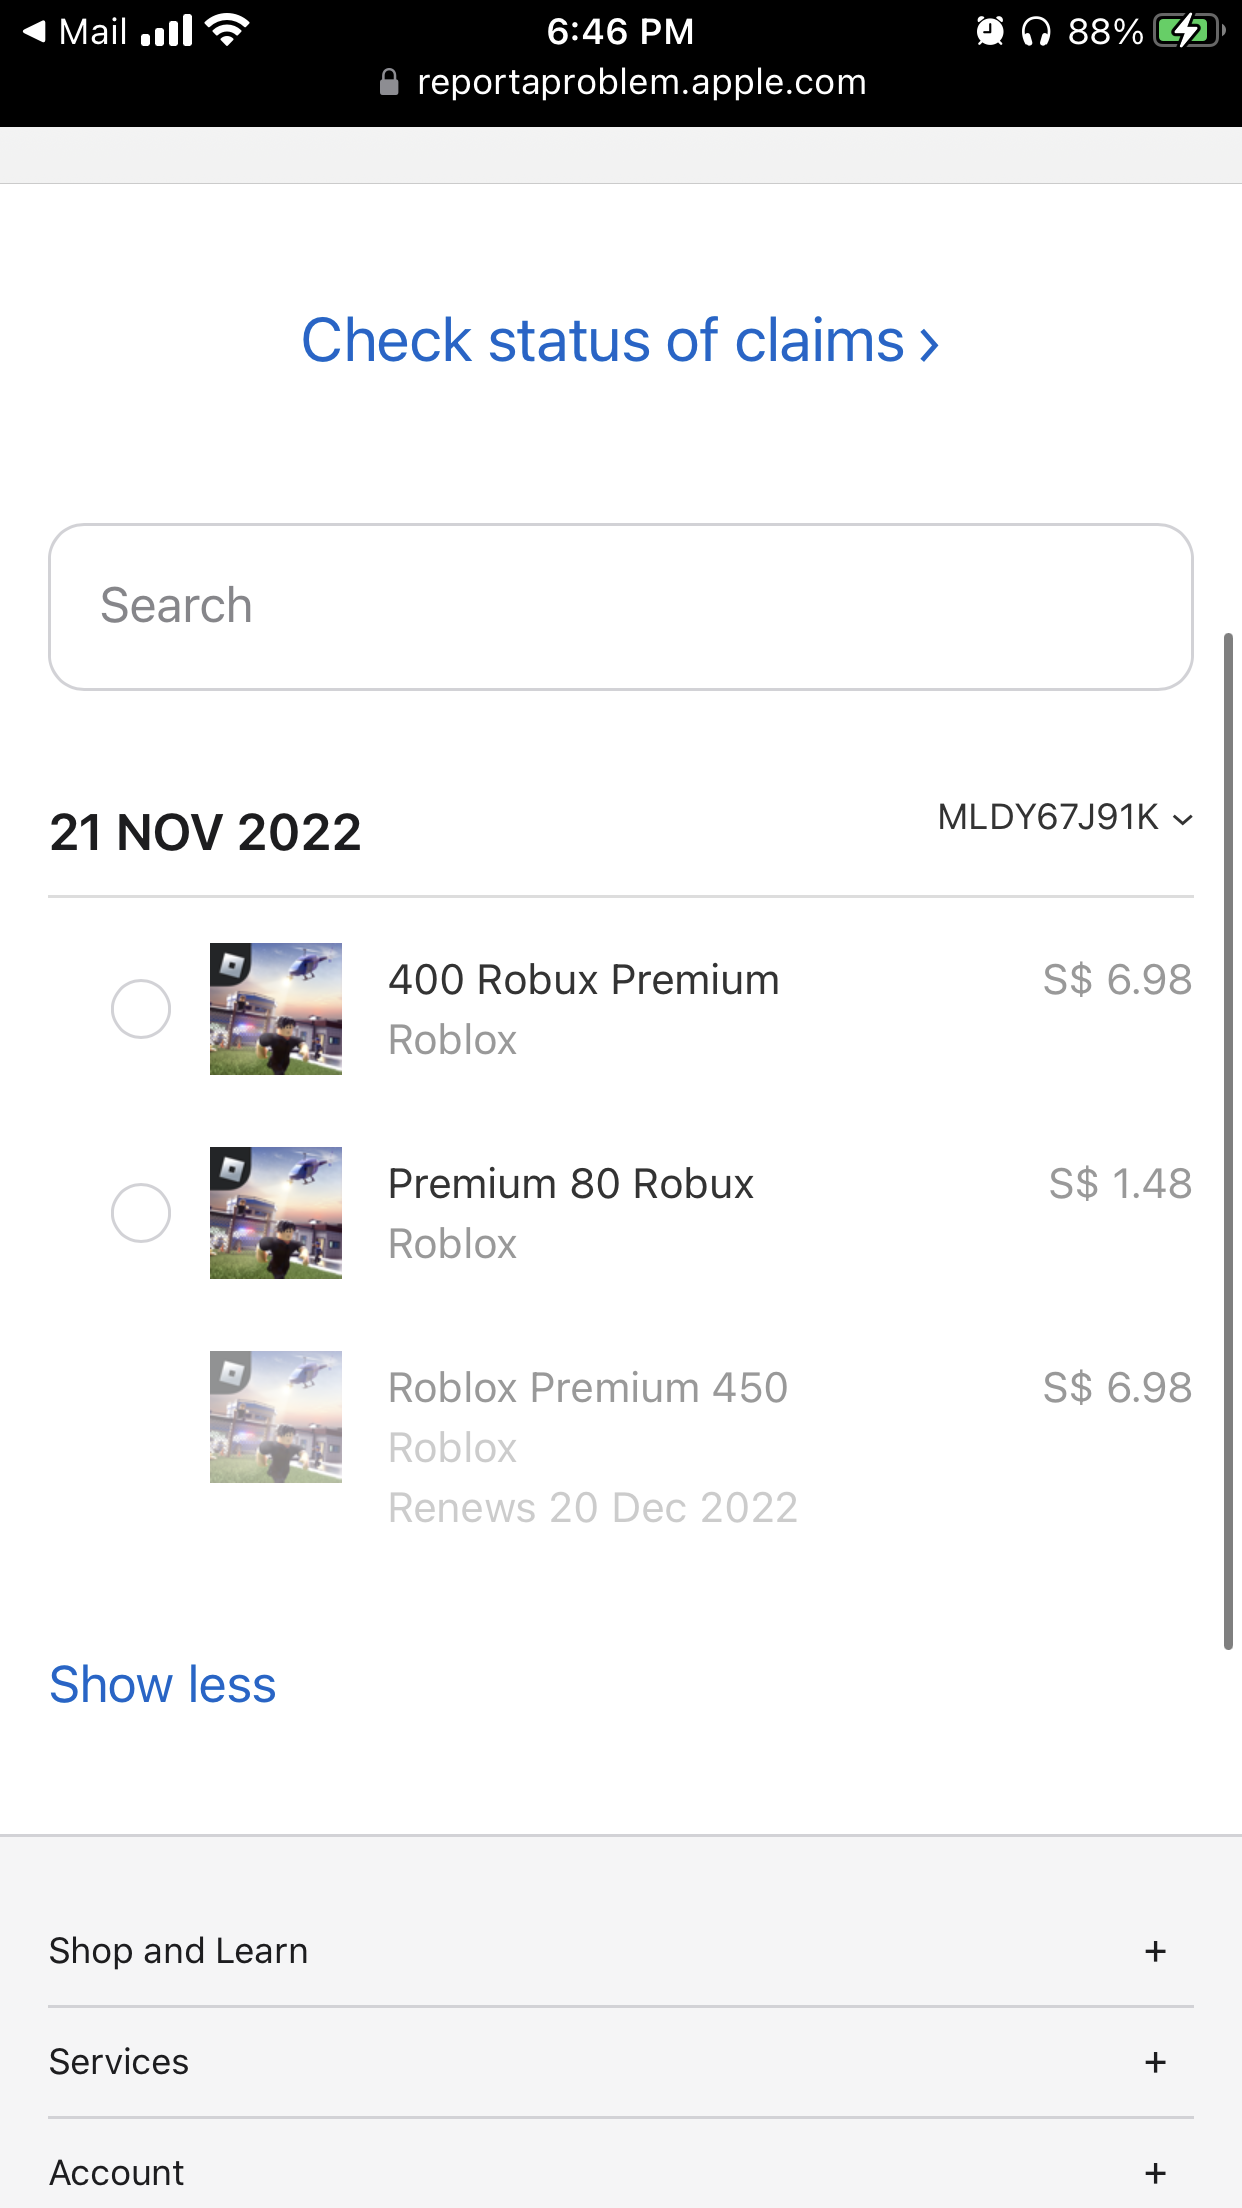 I cannot buy any robux please help - Apple Community